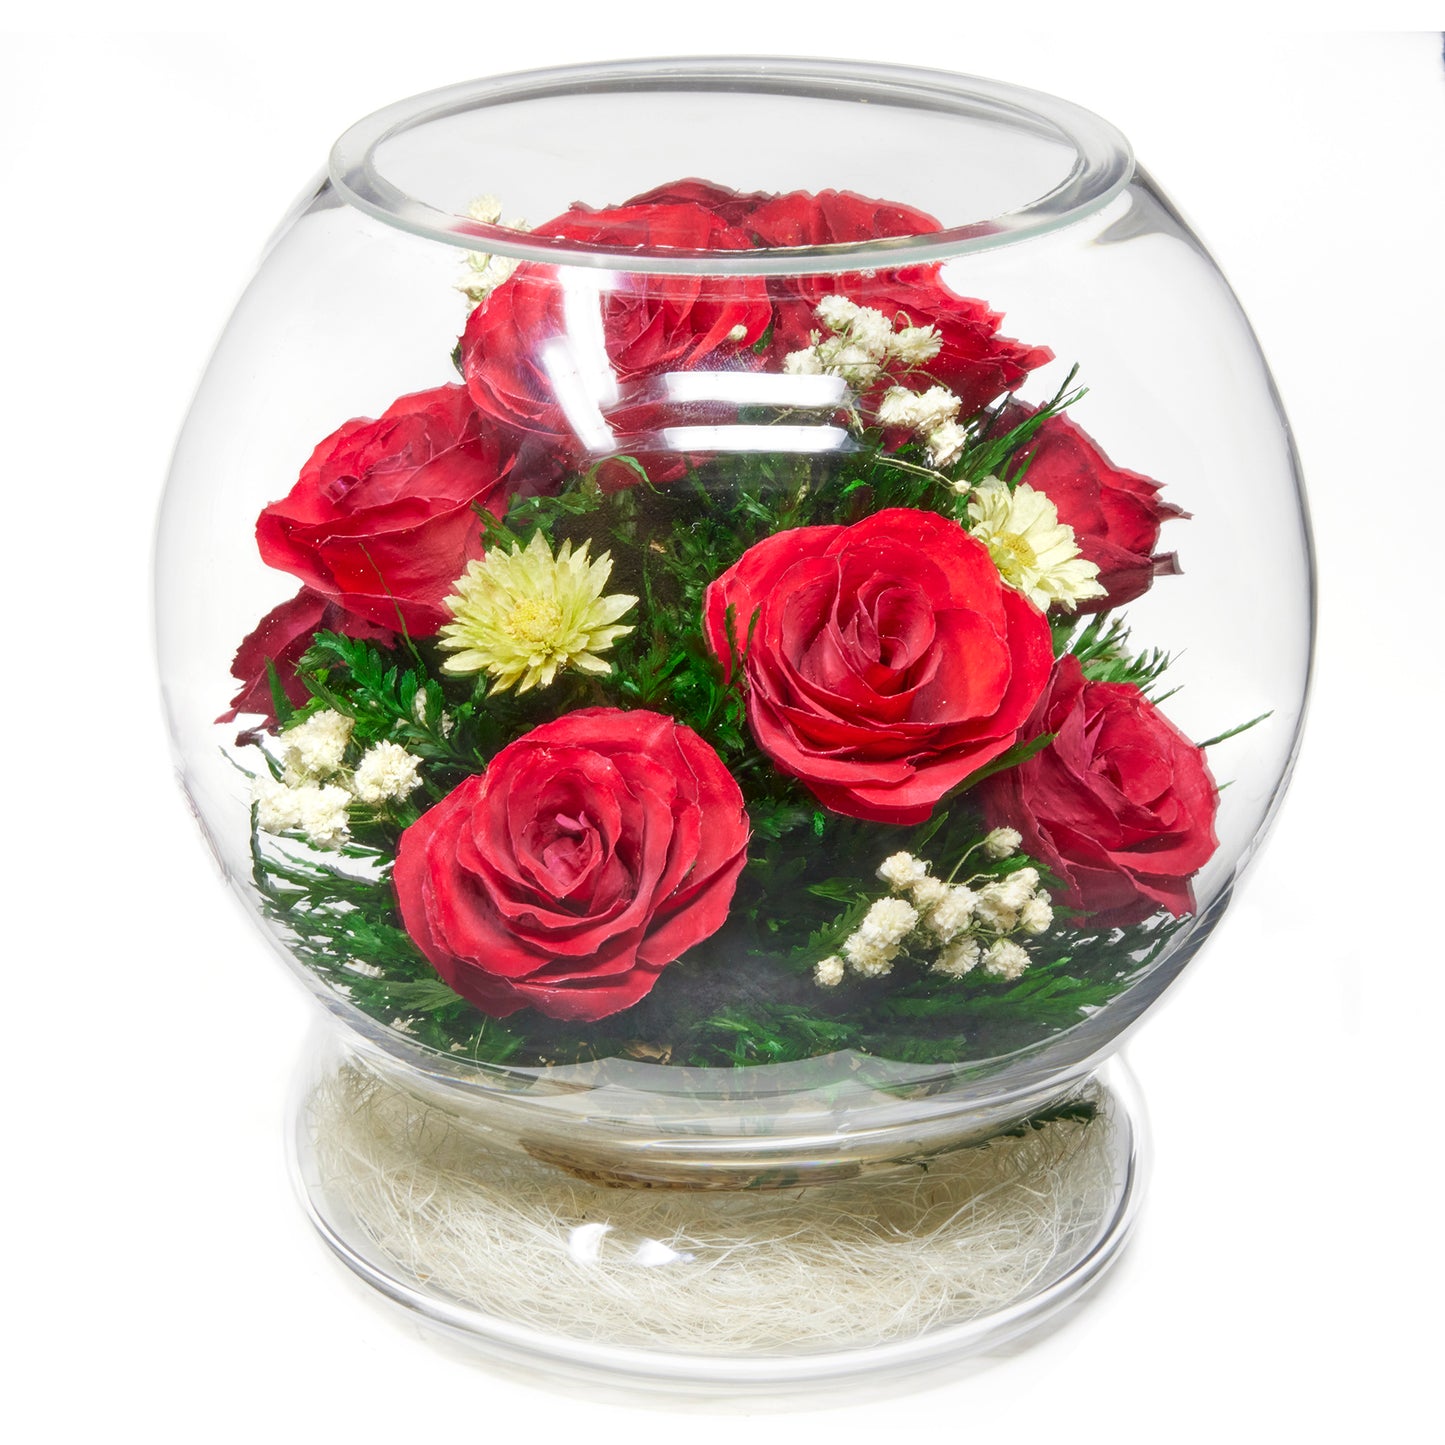 In Flores Veritas: Grand Romance Bowl - Lasts up to 5 Years - Elegant Gift for Any Occasion